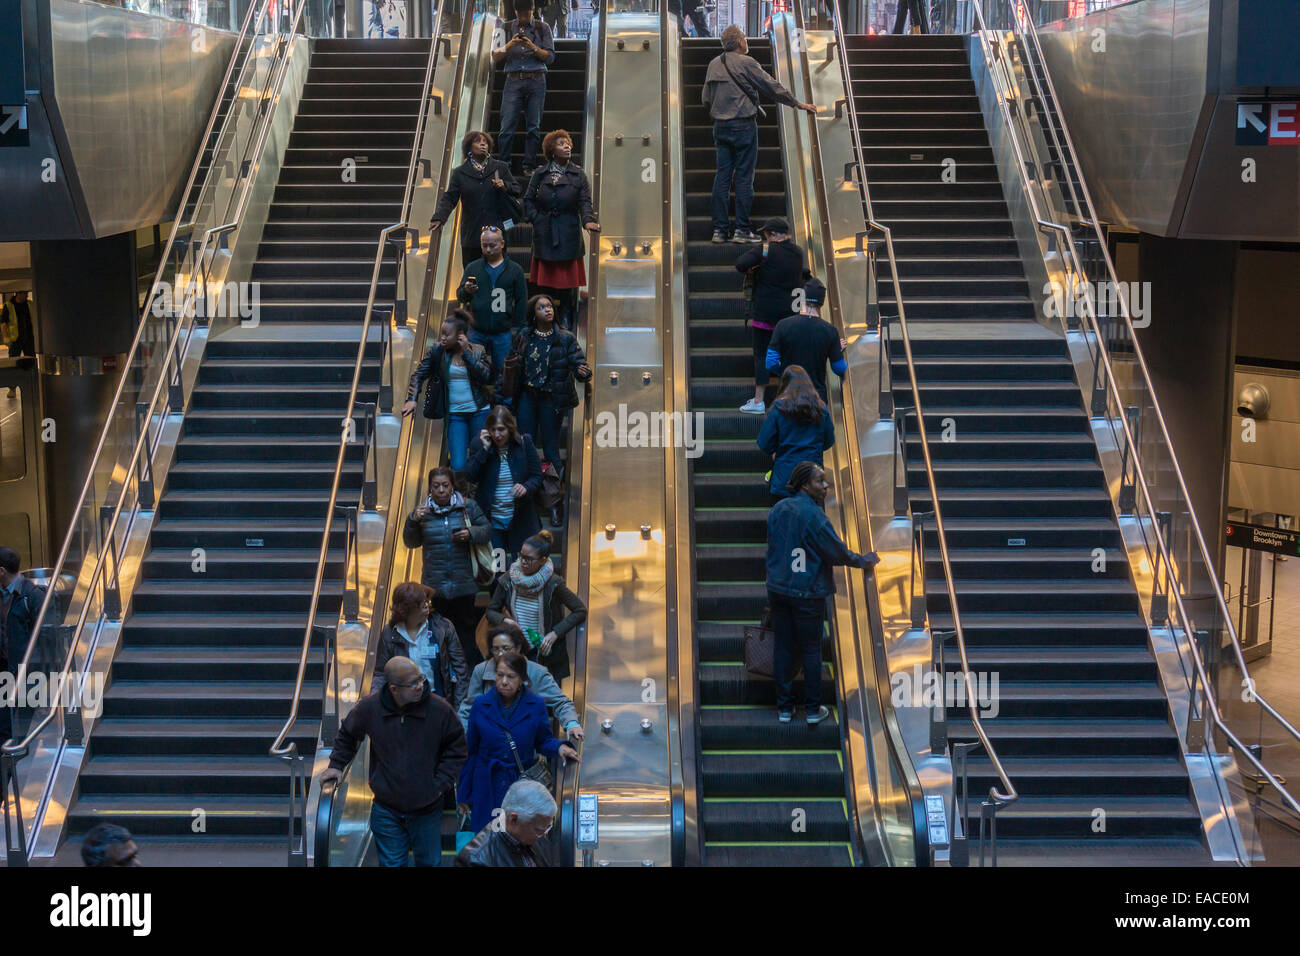 Rail buffs, commuters and the curious arrive via escalator together in the new Fulton Center in Lower Manhattan in New York Stock Photo